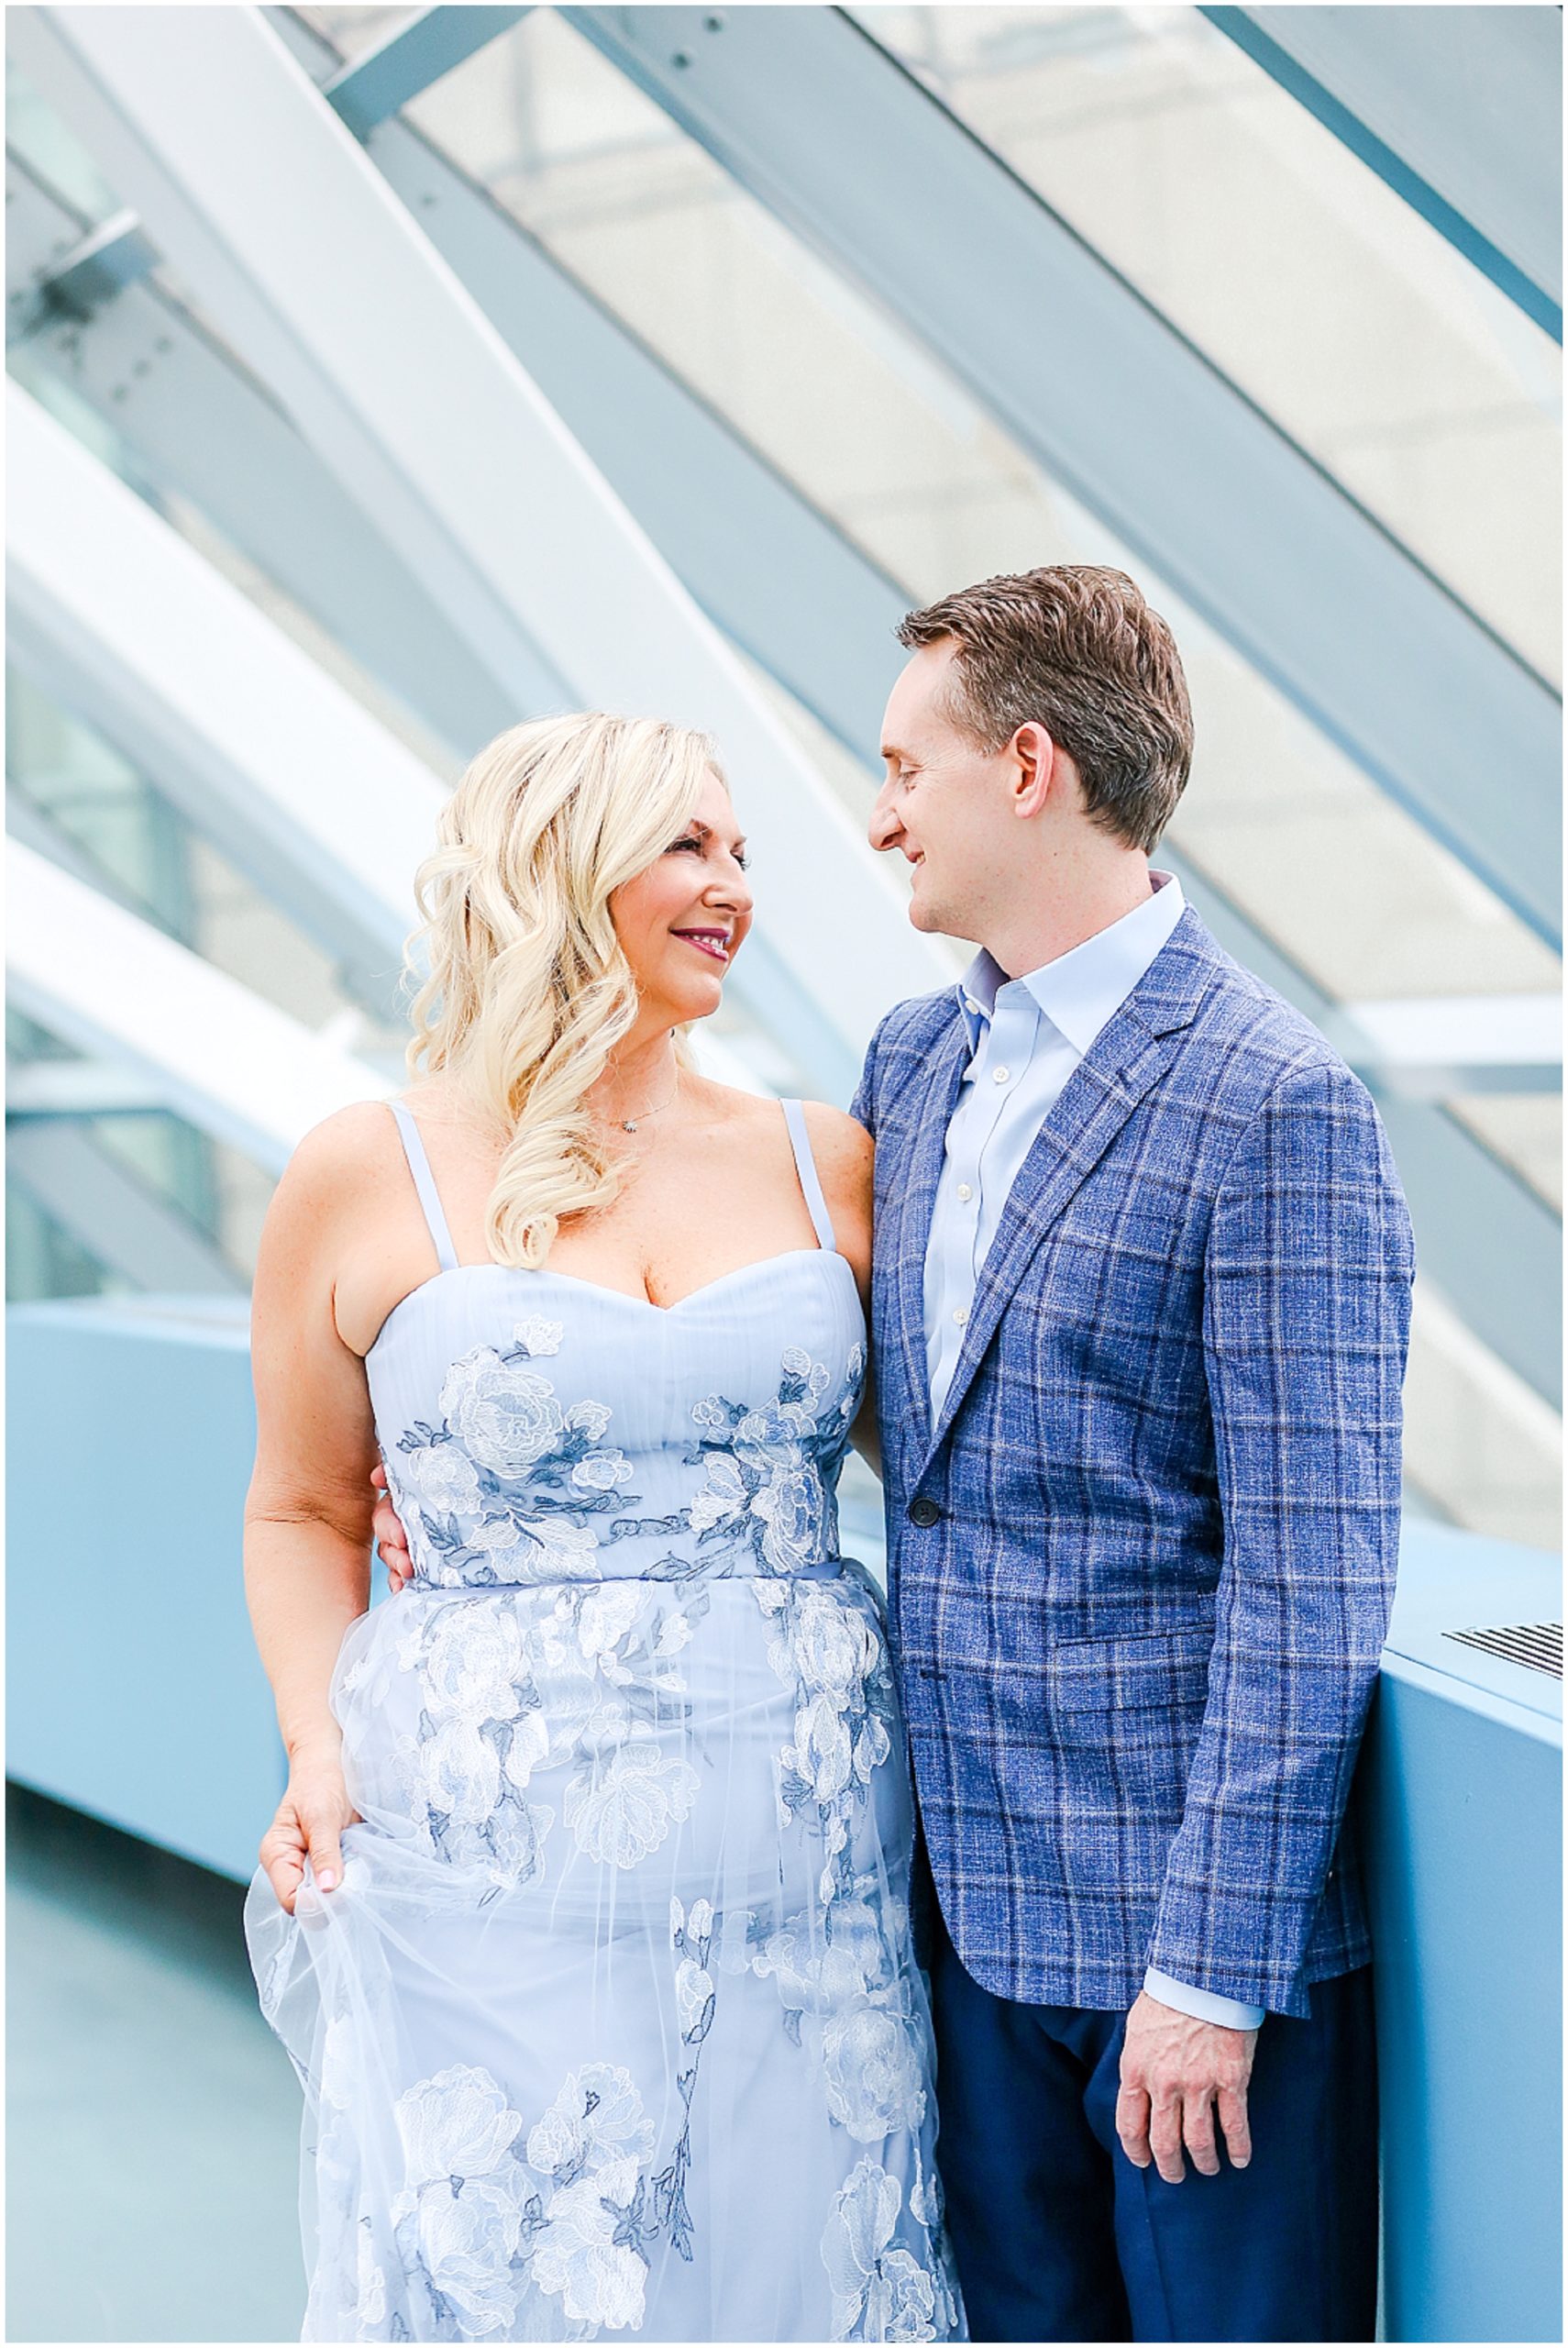 happy engagement photos - looking at each other